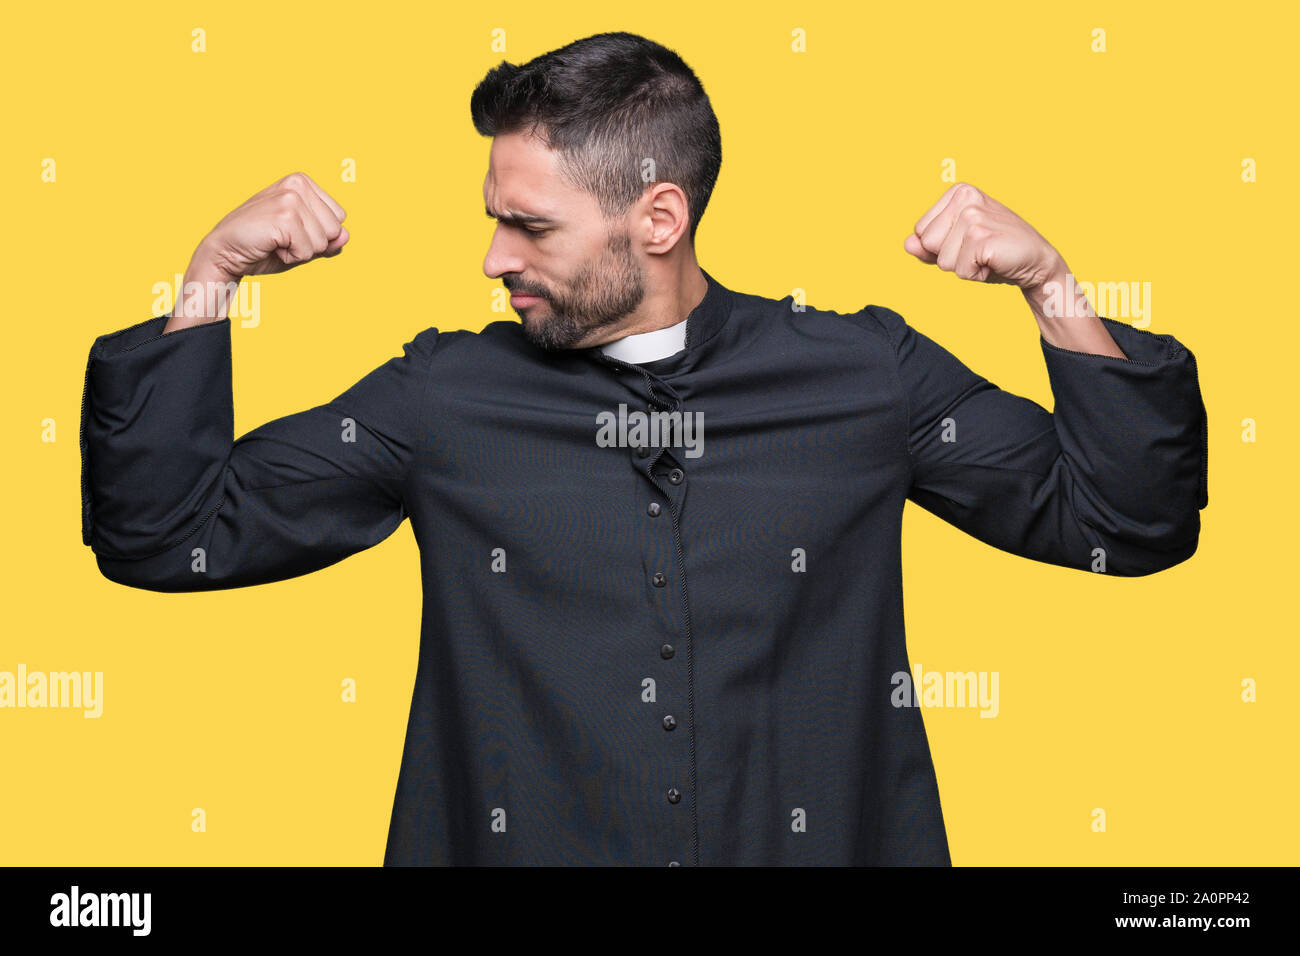 Young Christian priest over isolated background showing arms muscles smiling proud. Fitness concept. Stock Photo